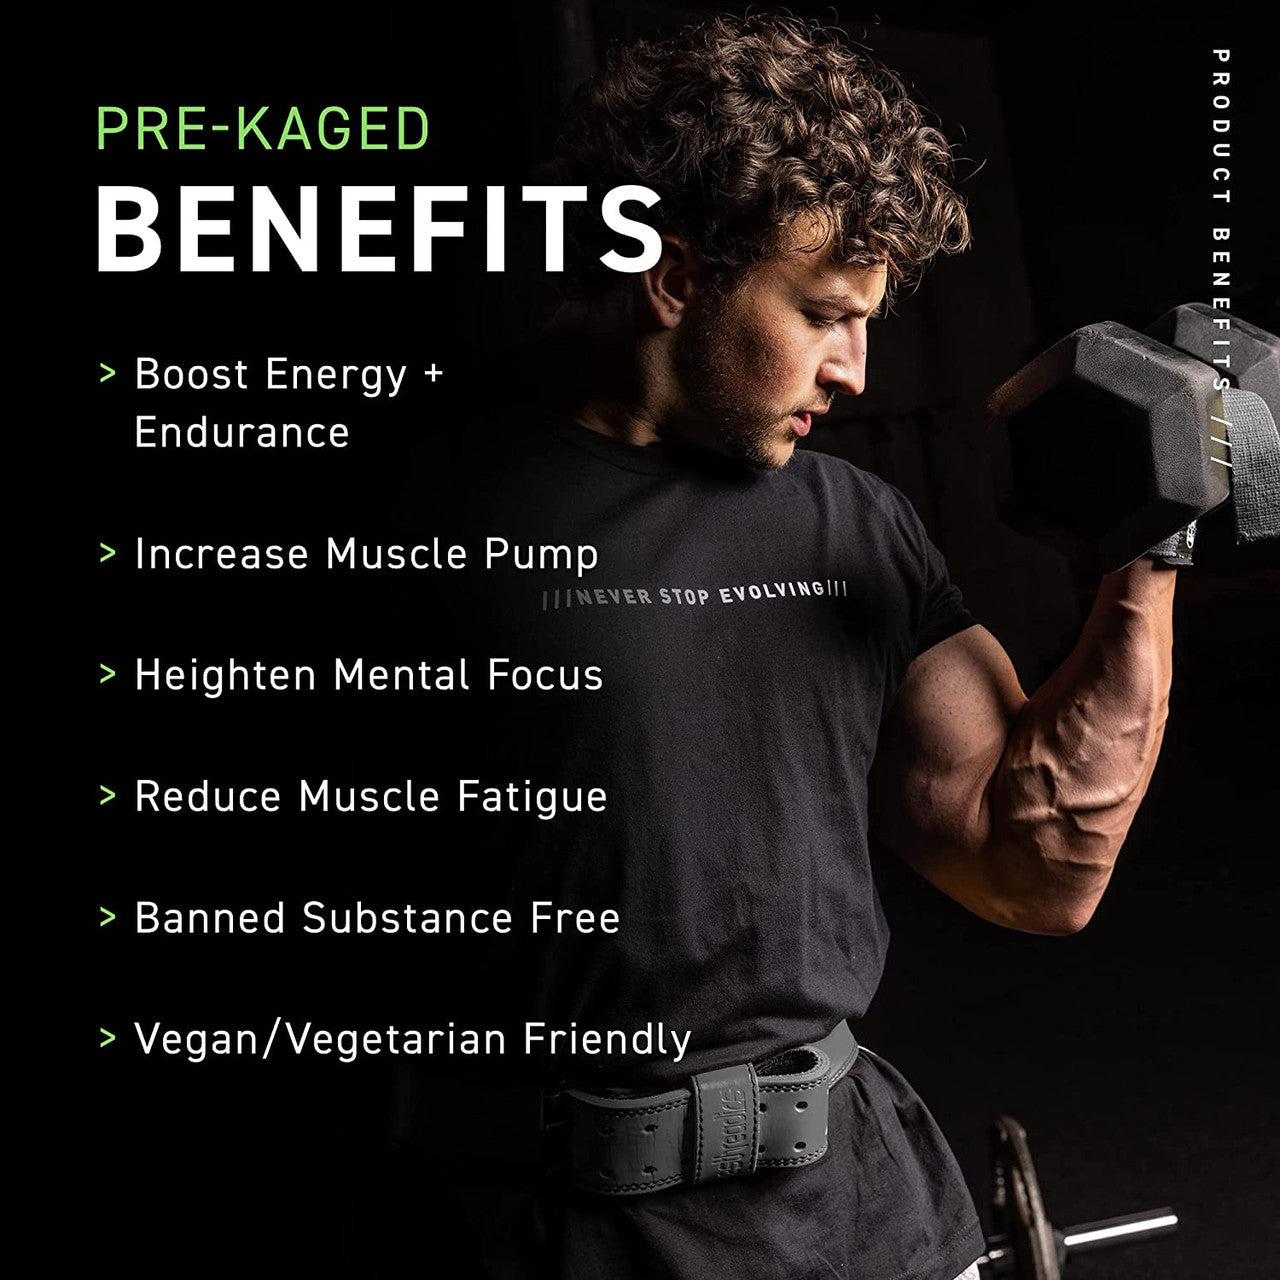 Kaged Muscle Pre-Kaged Benefits